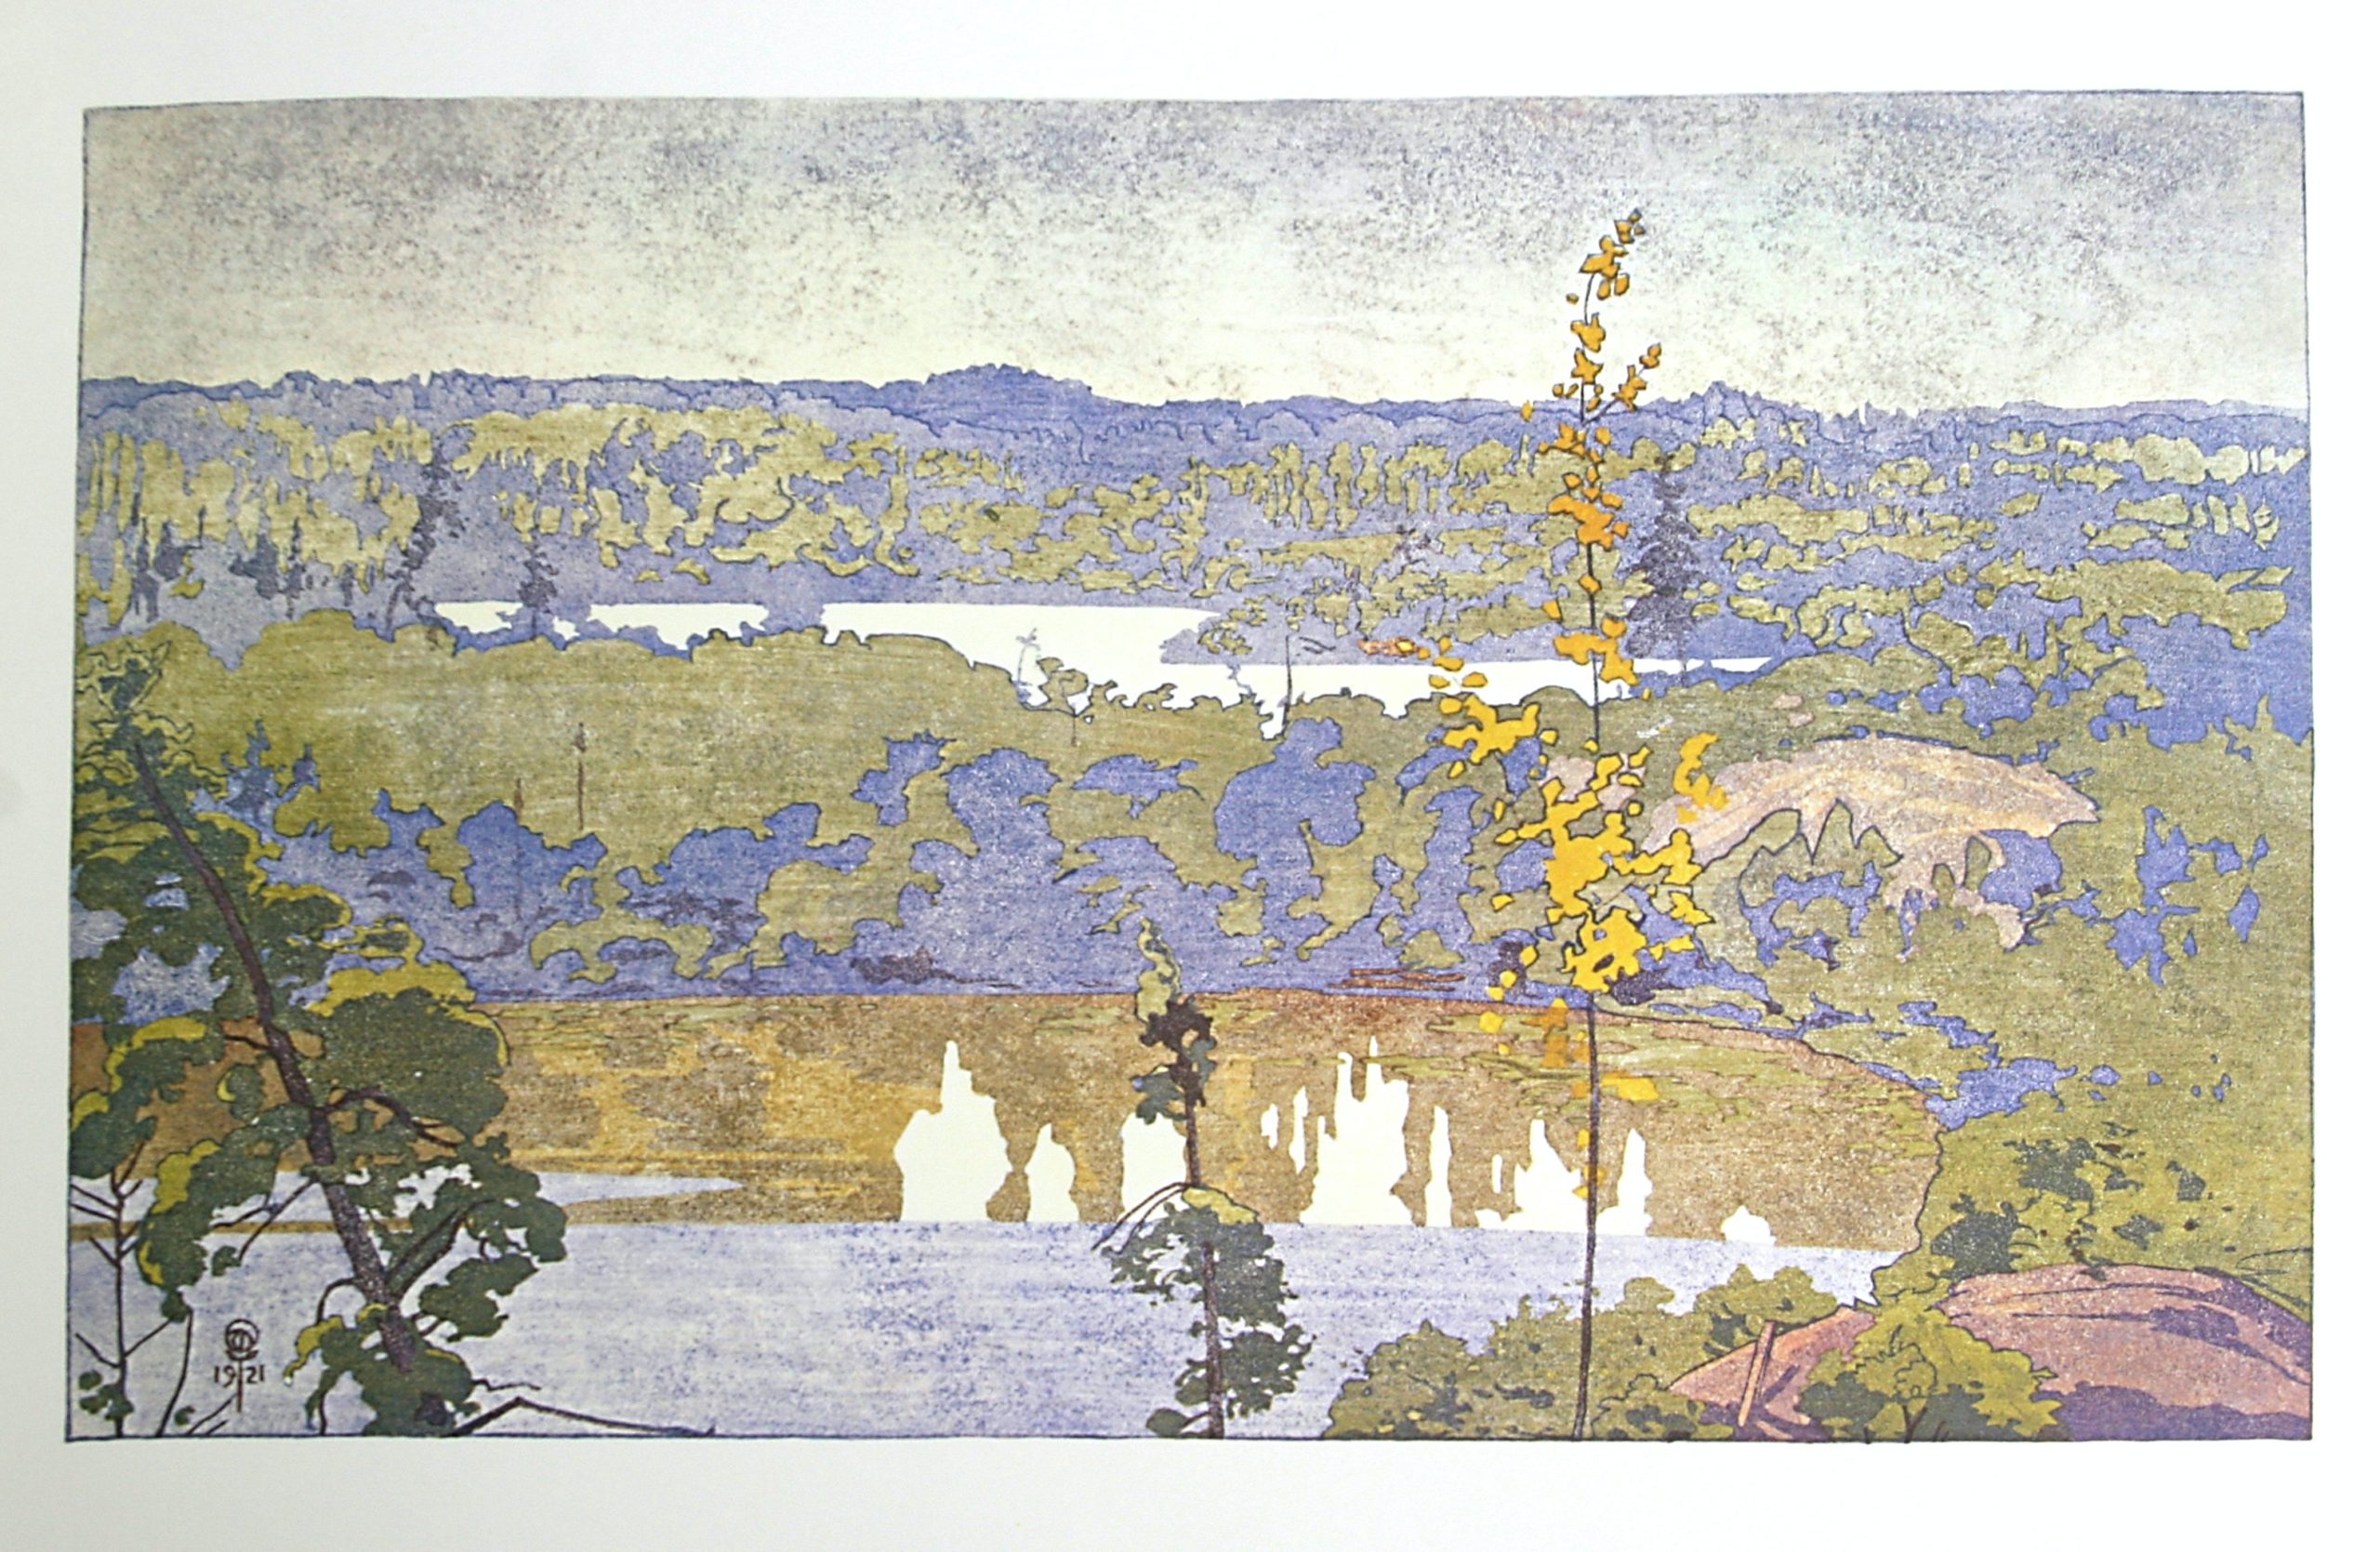 Two Lakes by WJ Phillips